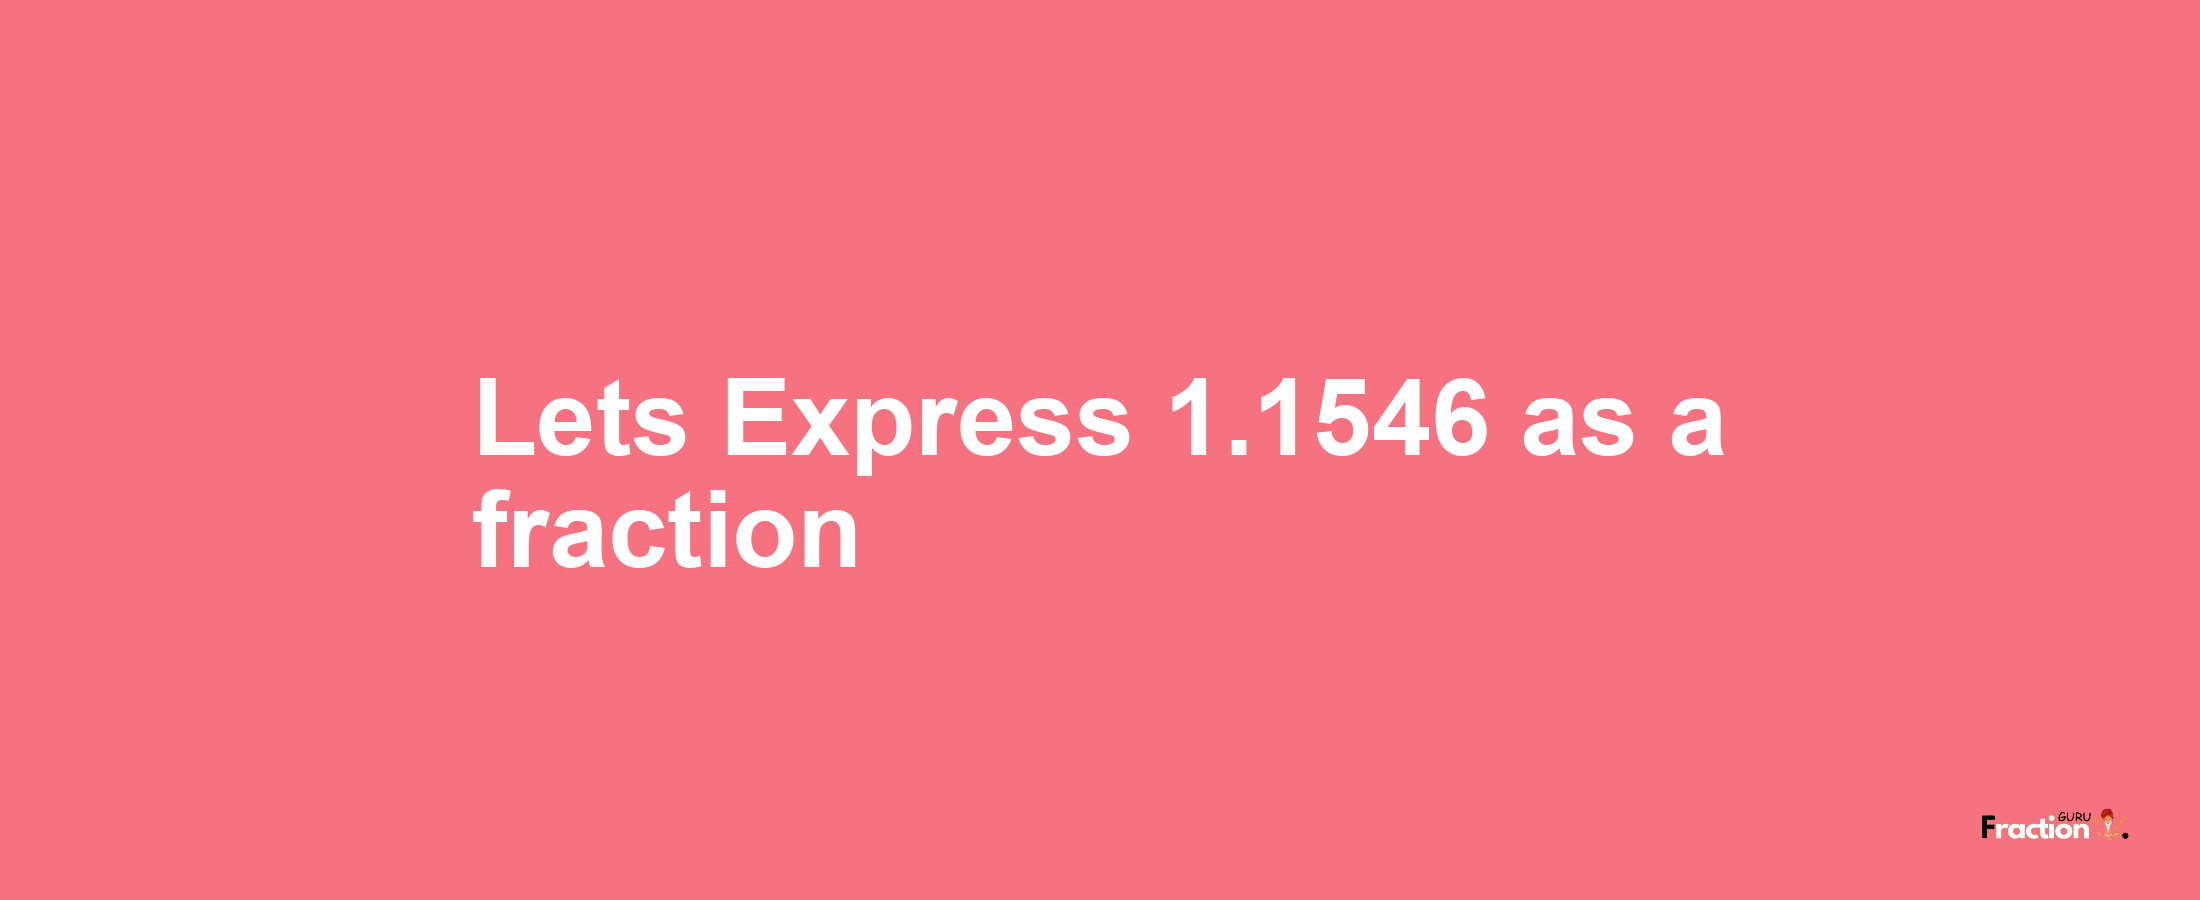 Lets Express 1.1546 as afraction